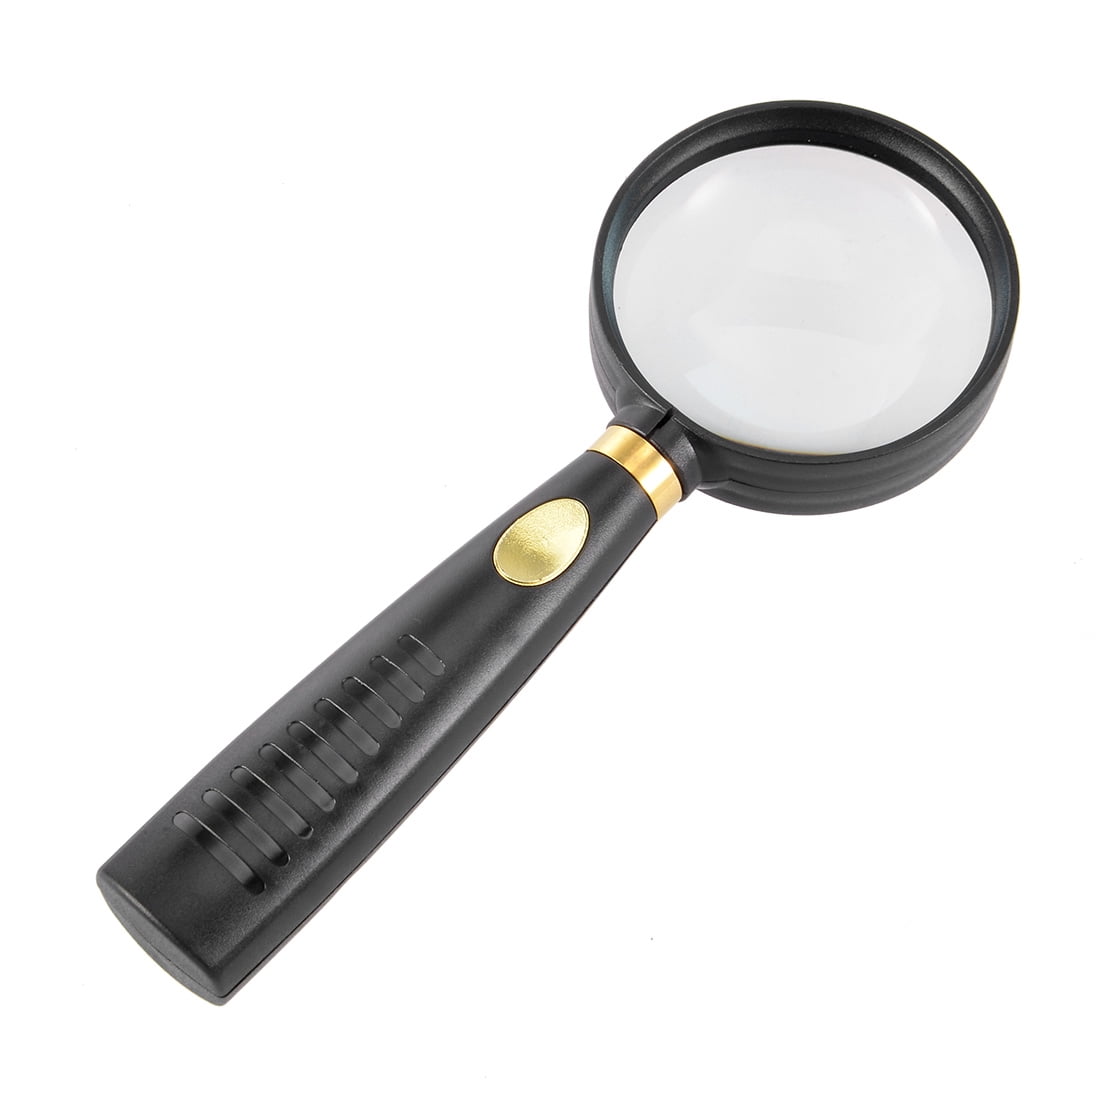 With Carry Pouch and Cleaning Cloth 75mm Magnifying Glass Len with Non-Slip Rubber Handle for Reading and Nature Exploration Yexixsr Magnifying Glass 5X Handheld Reading Magnifier for Kids & Seniors 